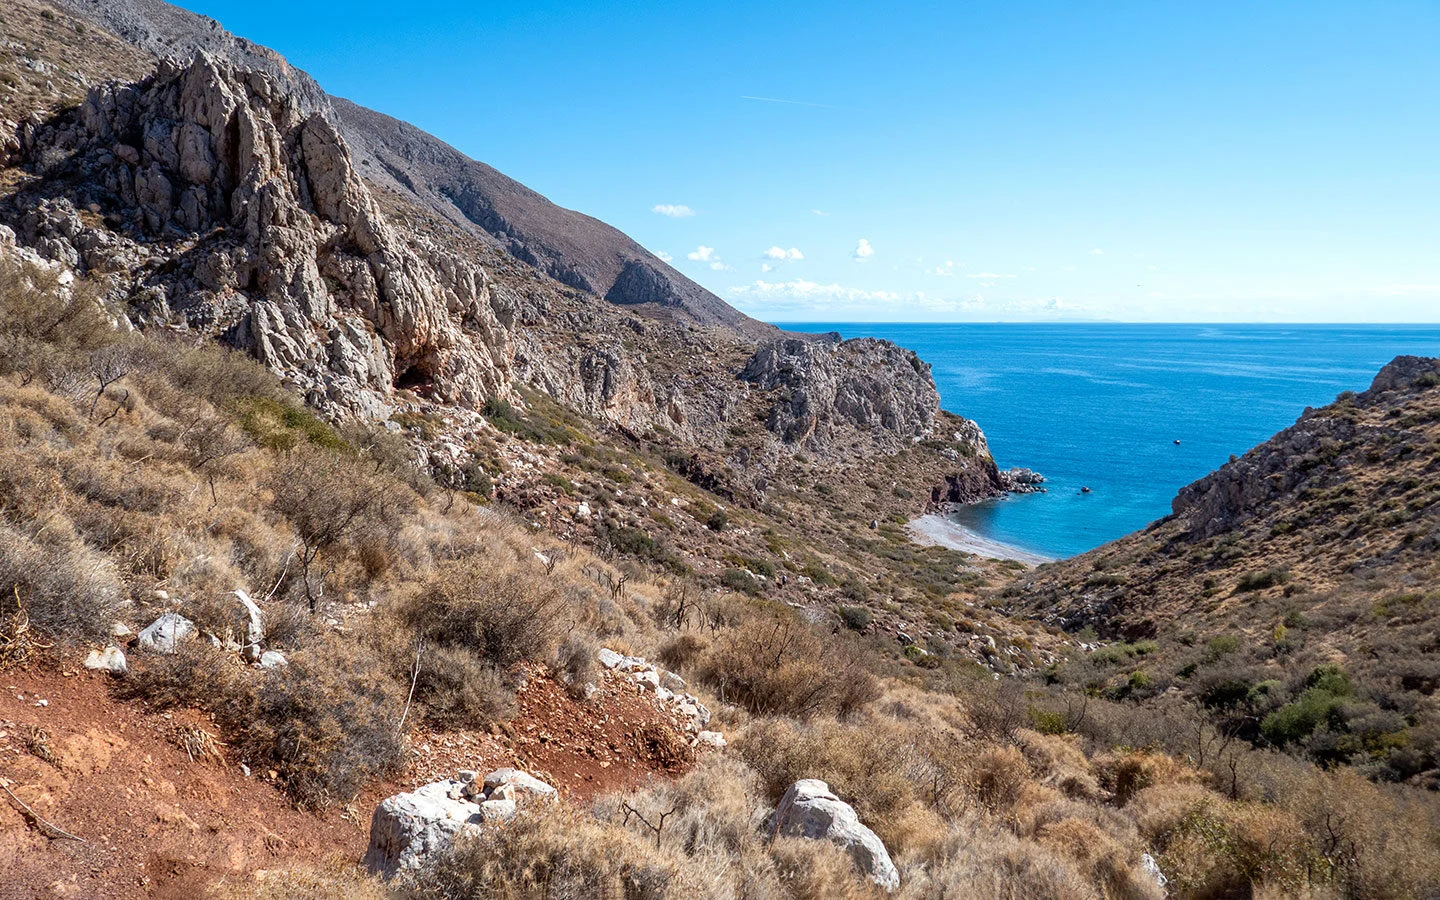 Hiking to Limnionizia beach, one of the best things to do in Hydra